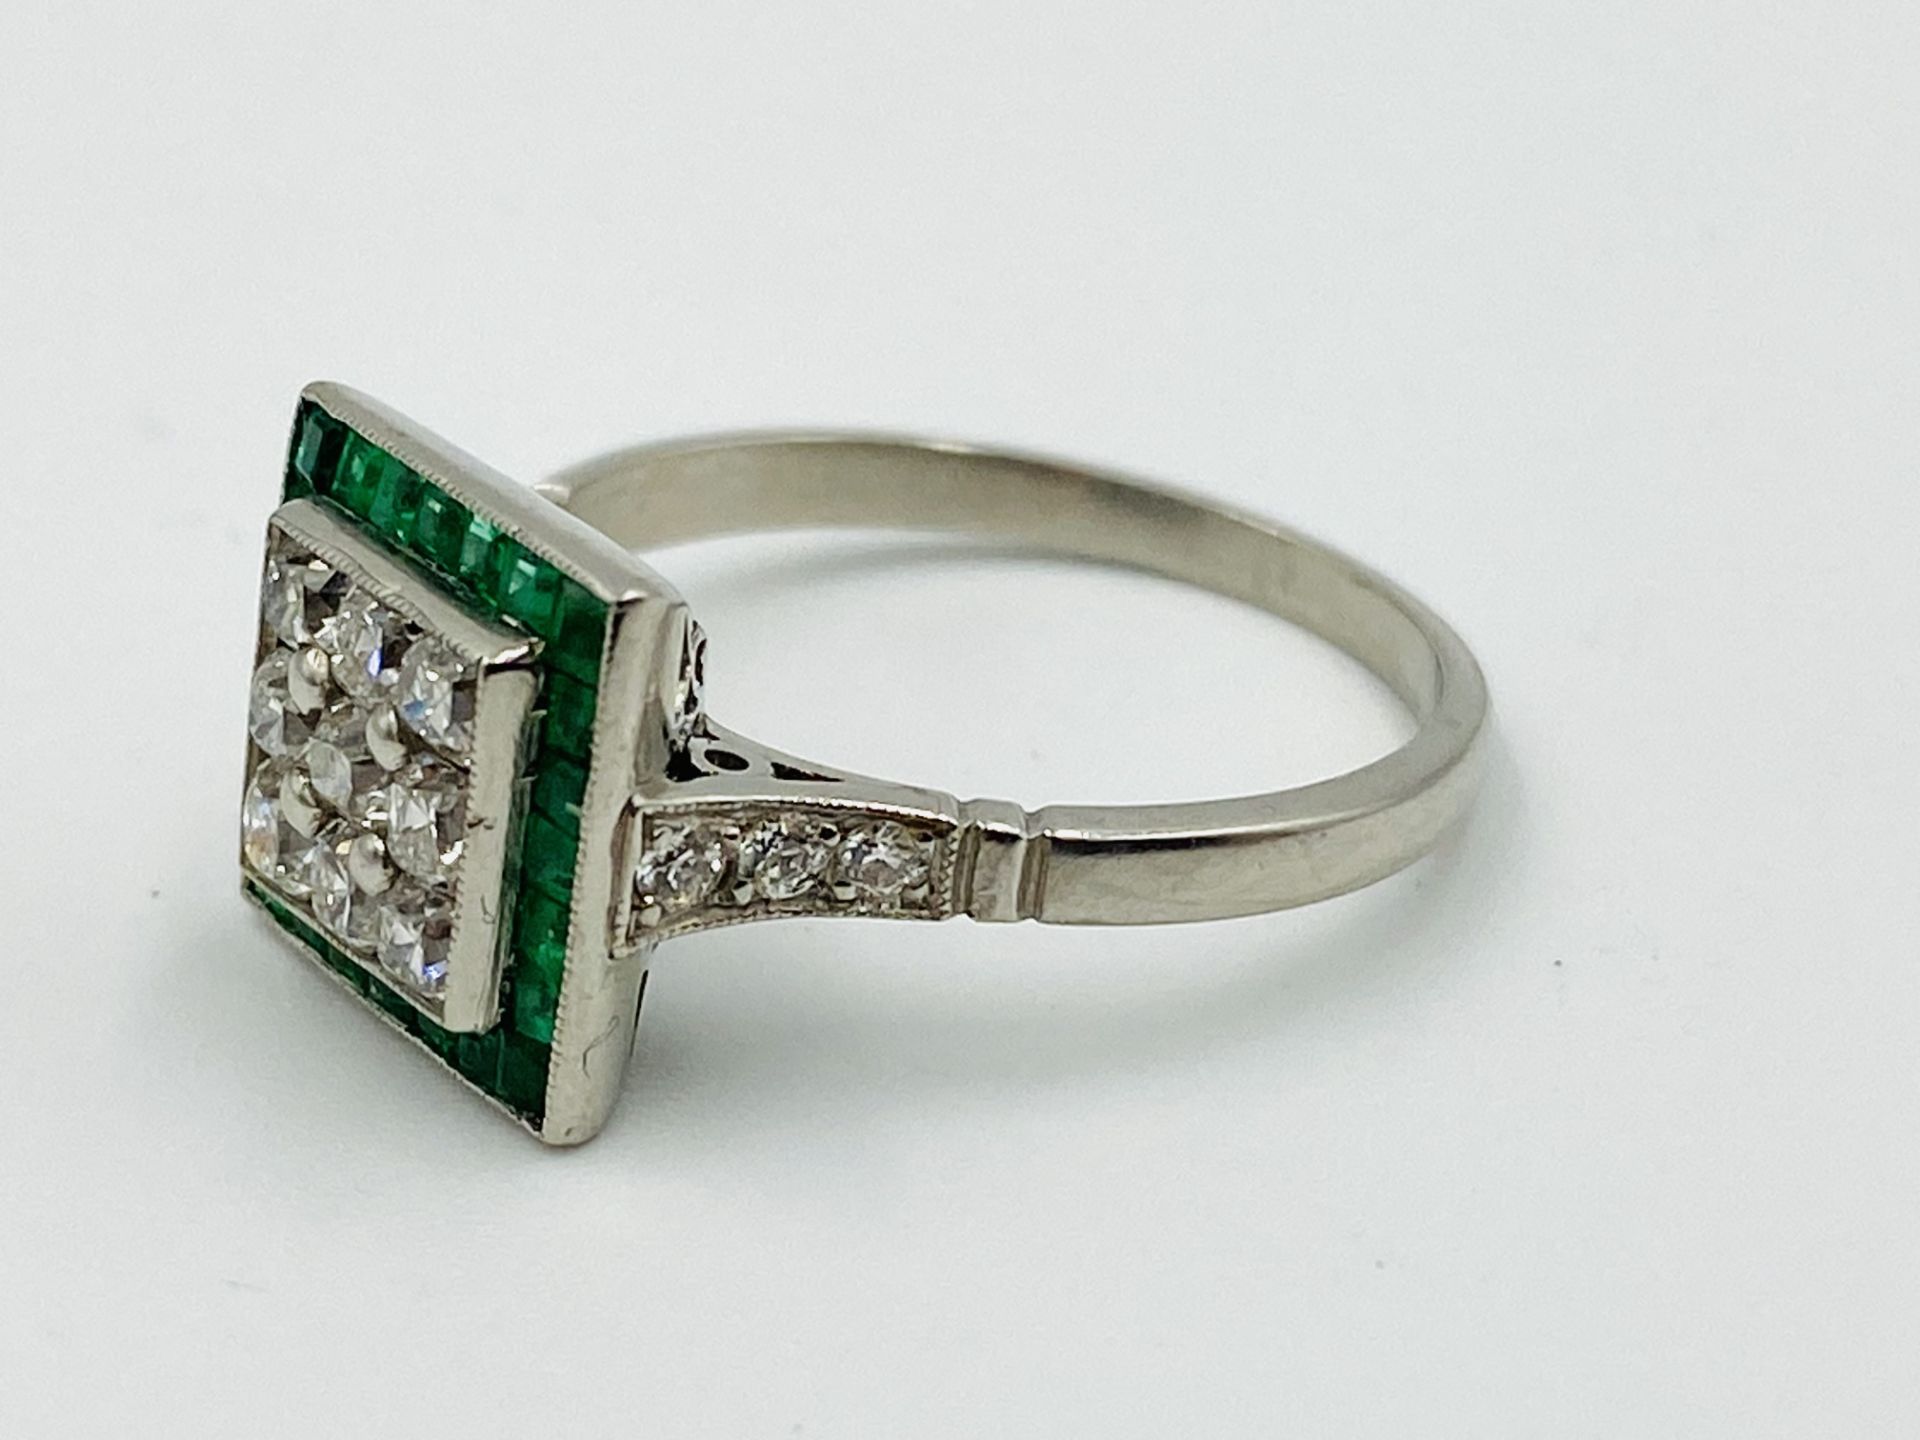 White gold, emerald and diamond ring - Image 3 of 6